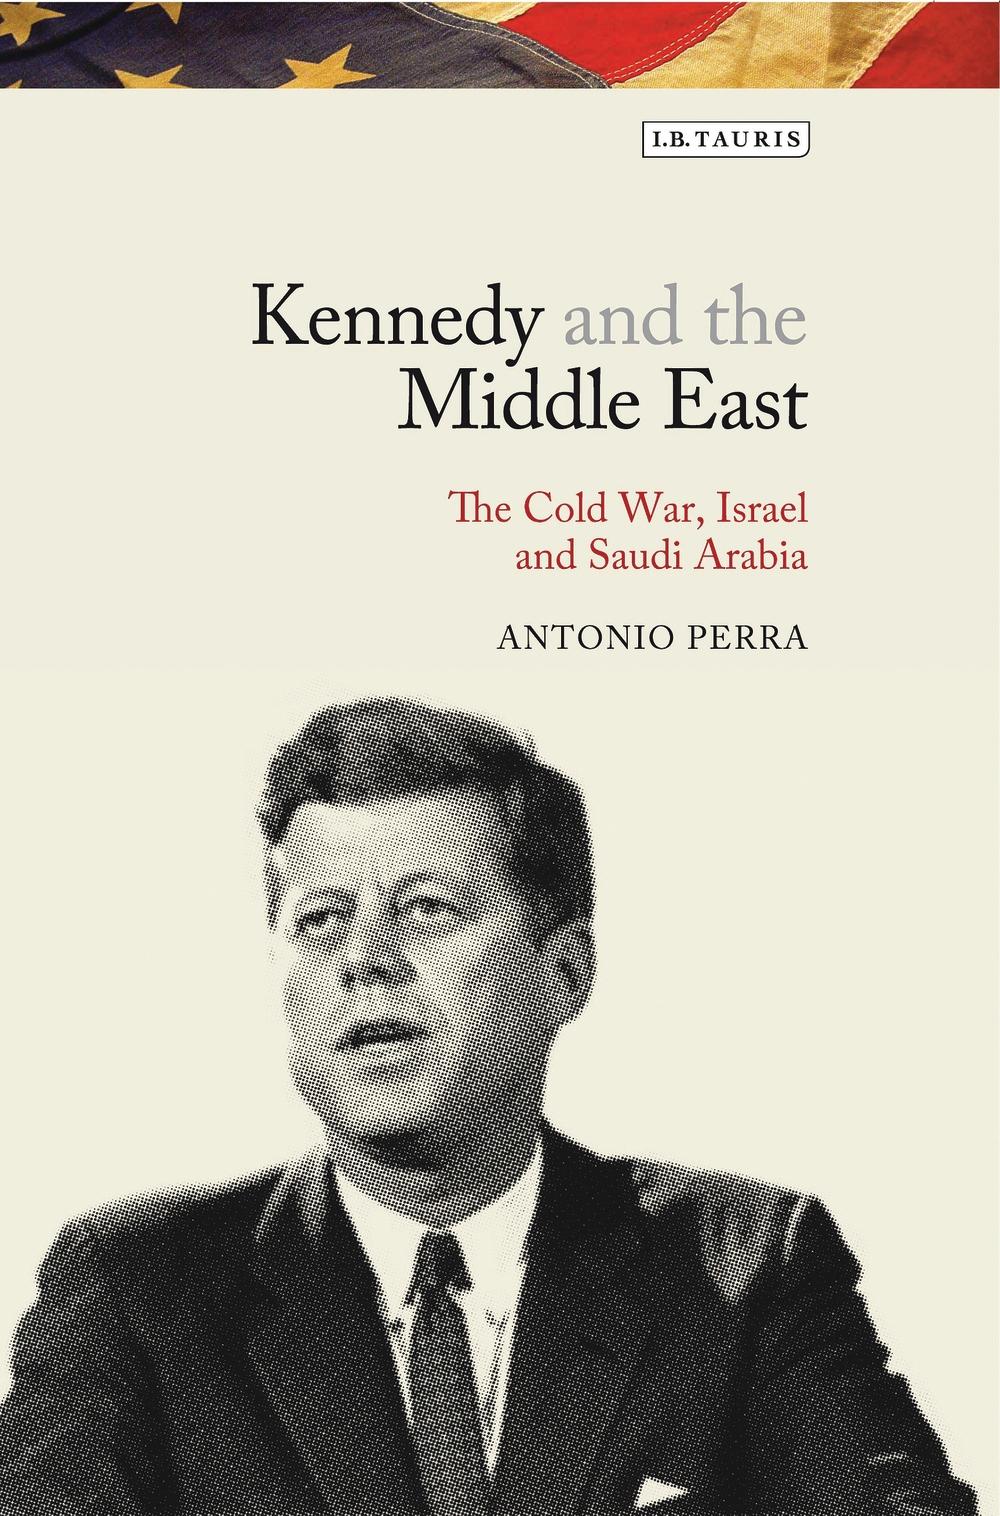 Kennedy and the Middle East - Antonio Perra